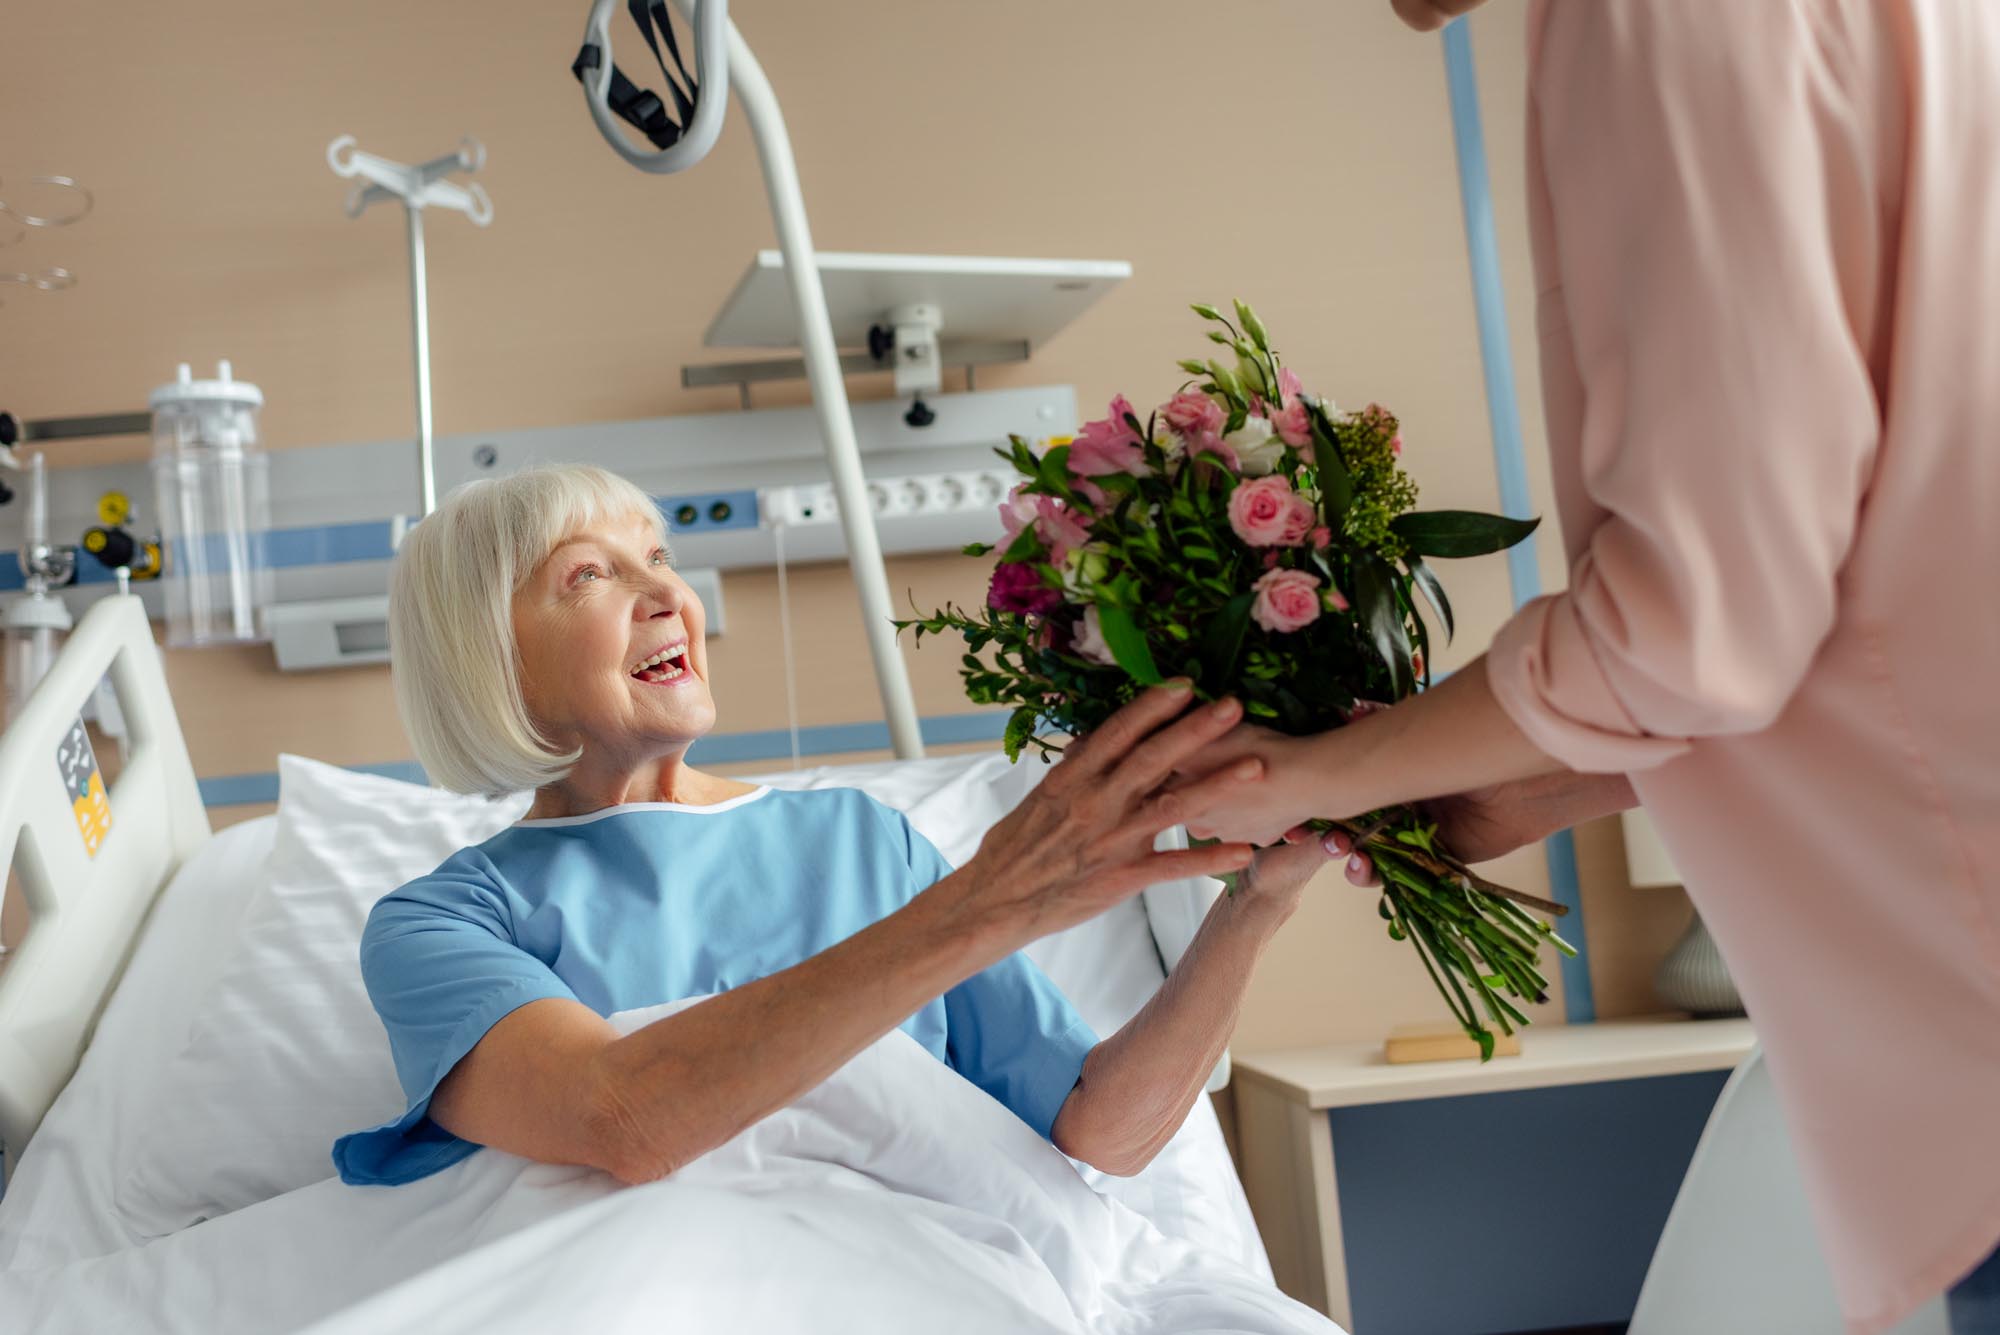 daughter presenting flowers to smiling senior woman lying in bed